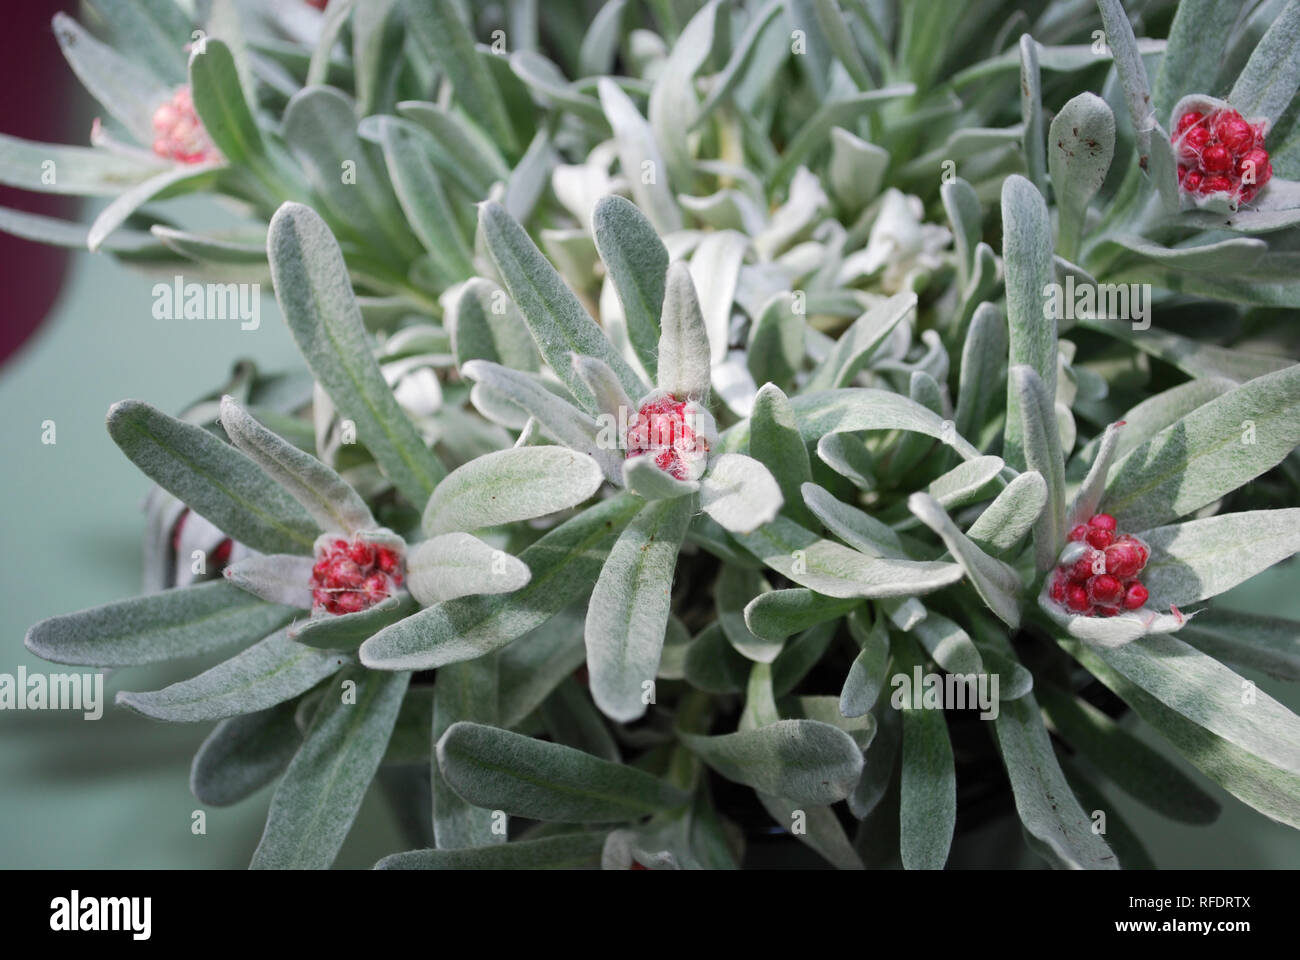 Rhododendron Arboreum With Silver Leaves And Red Flower S Buds Springtime Stock Photo Alamy